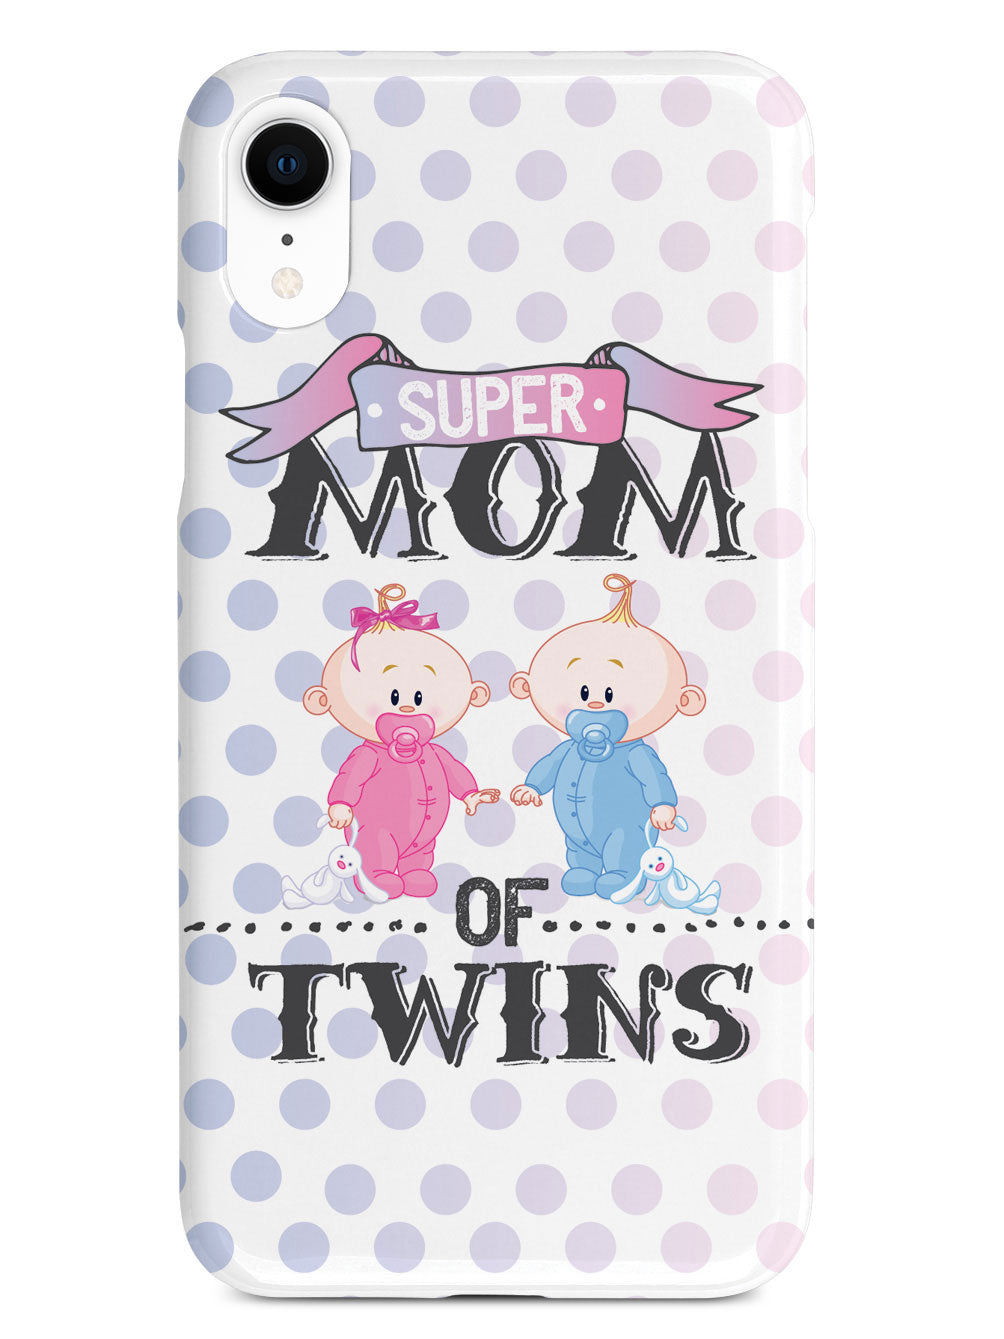 Super Mom of Twins - Girl and Boy Case